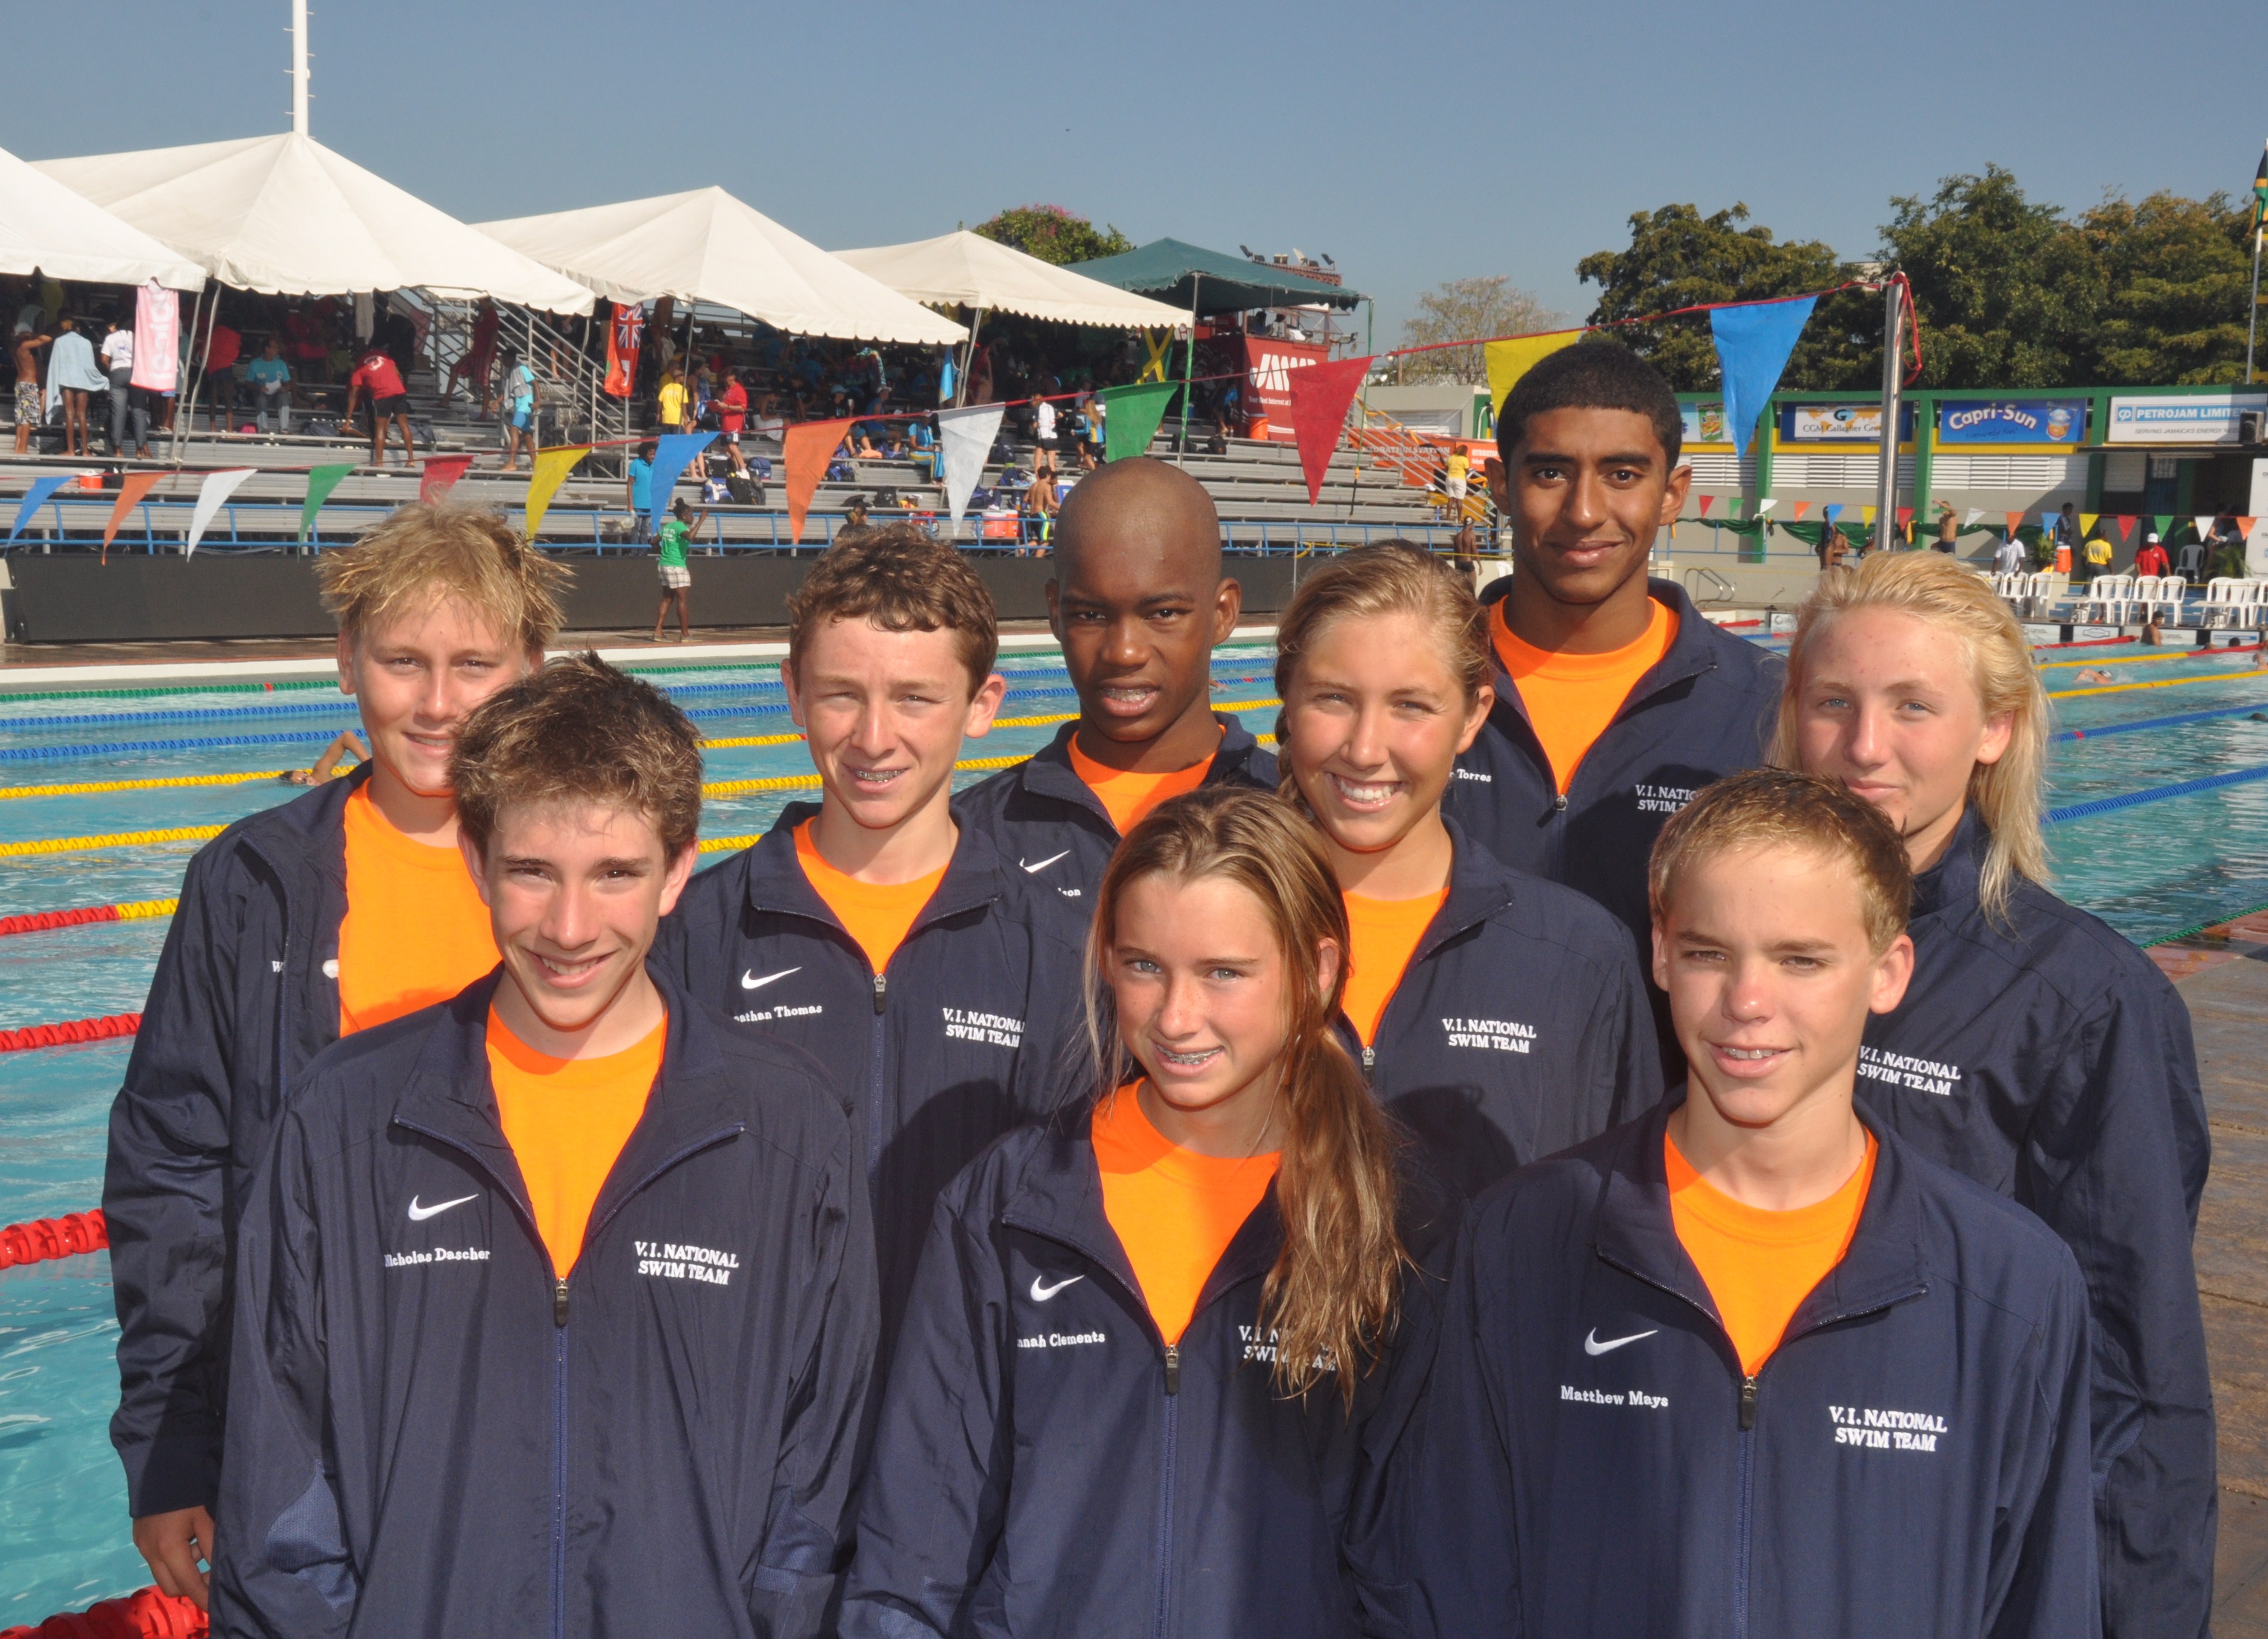 The nine swimmers representing the Virgin Islands were  Hannah Clements, Sasha Klein and Portia Norkaitis from St. Thomas and Matthew Mays, Kenny Wilson, Jonathan Thomas, Webster Bozzo, Victor Torres and Nicholas Dascher from St. Croix.  